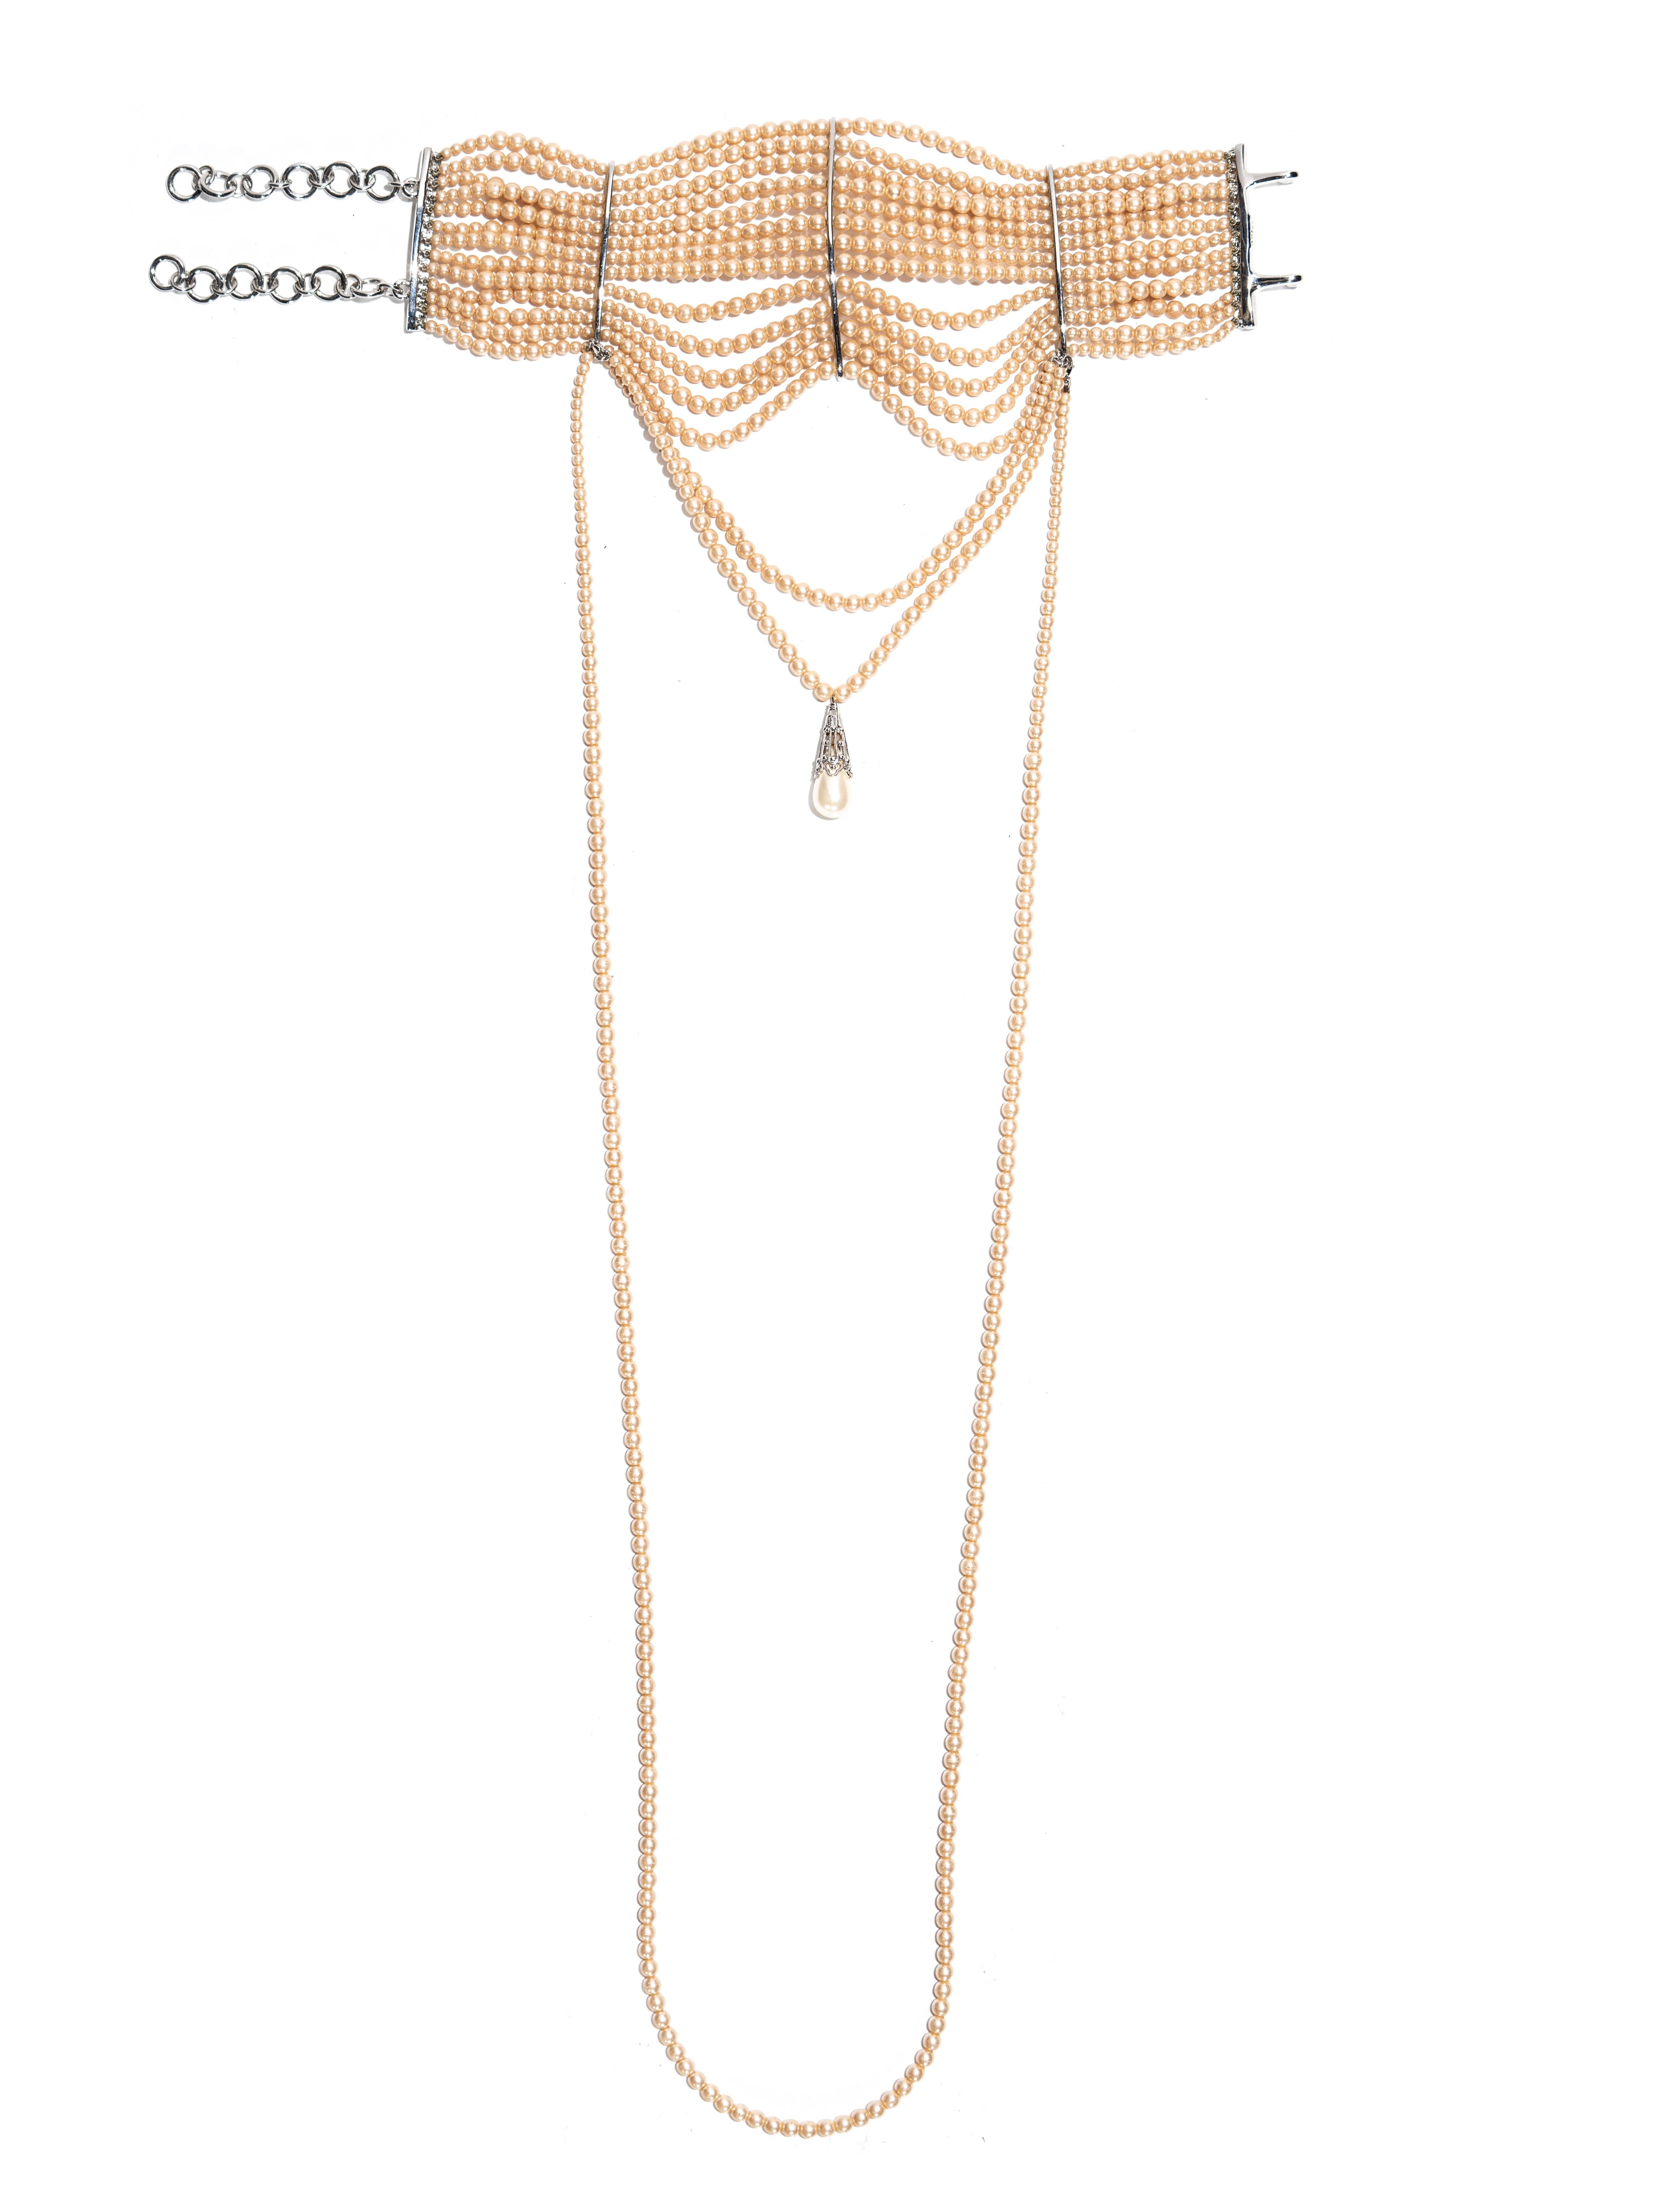 ▪ Christian Dior faux pearl choker necklace  
▪ Designed by John Galliano  
▪ 16-strands of faux pearls
▪ Large pendent set in metal hangs at the center   
▪ Polished silver metal hardware  
▪ 2 adjustable chain closures at the back  
▪